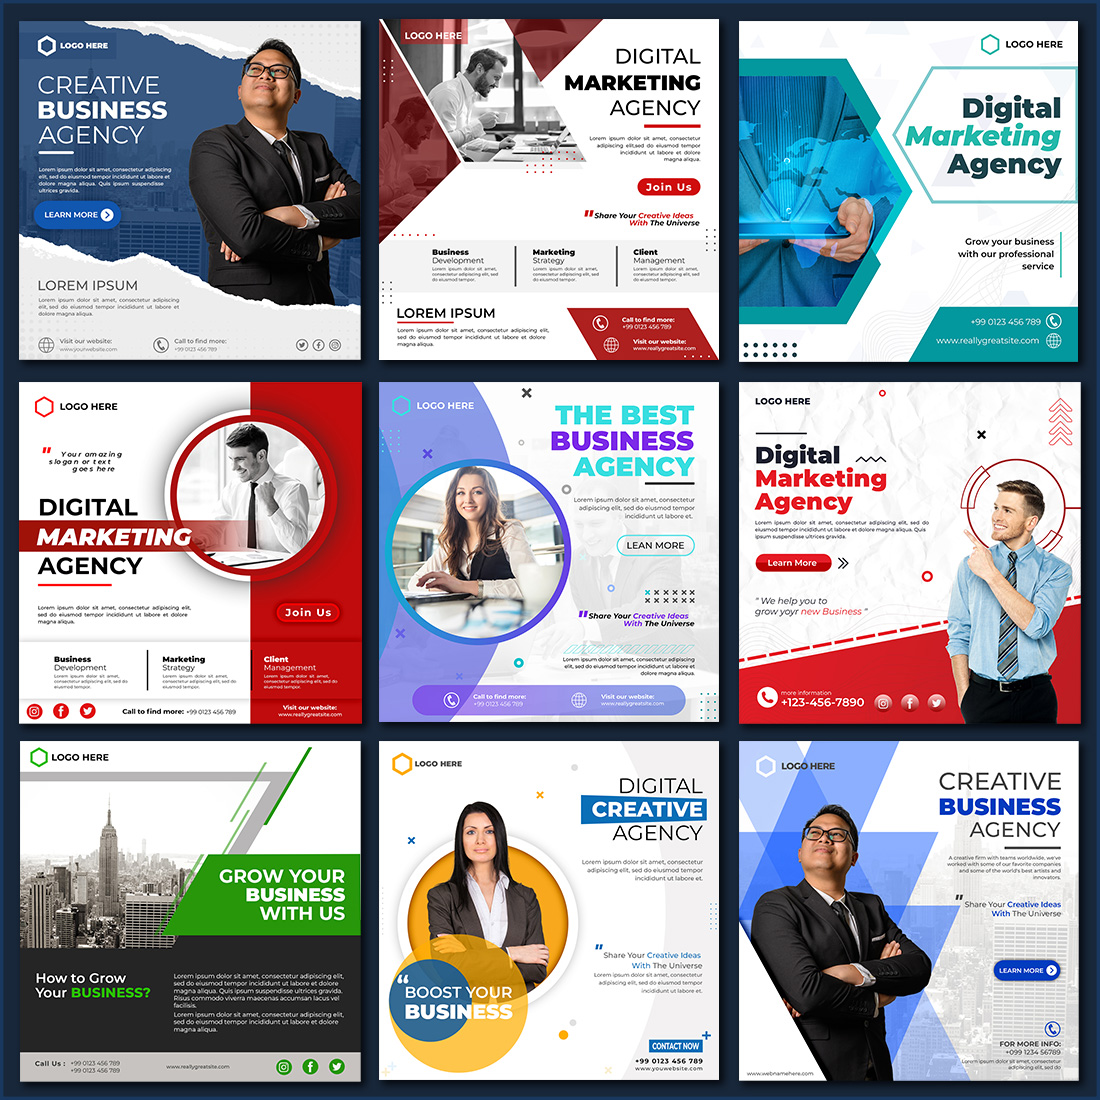 10+ Corporate and Digital Marketing Agency Social Media Posts And Web Banner PSD Template preview image.